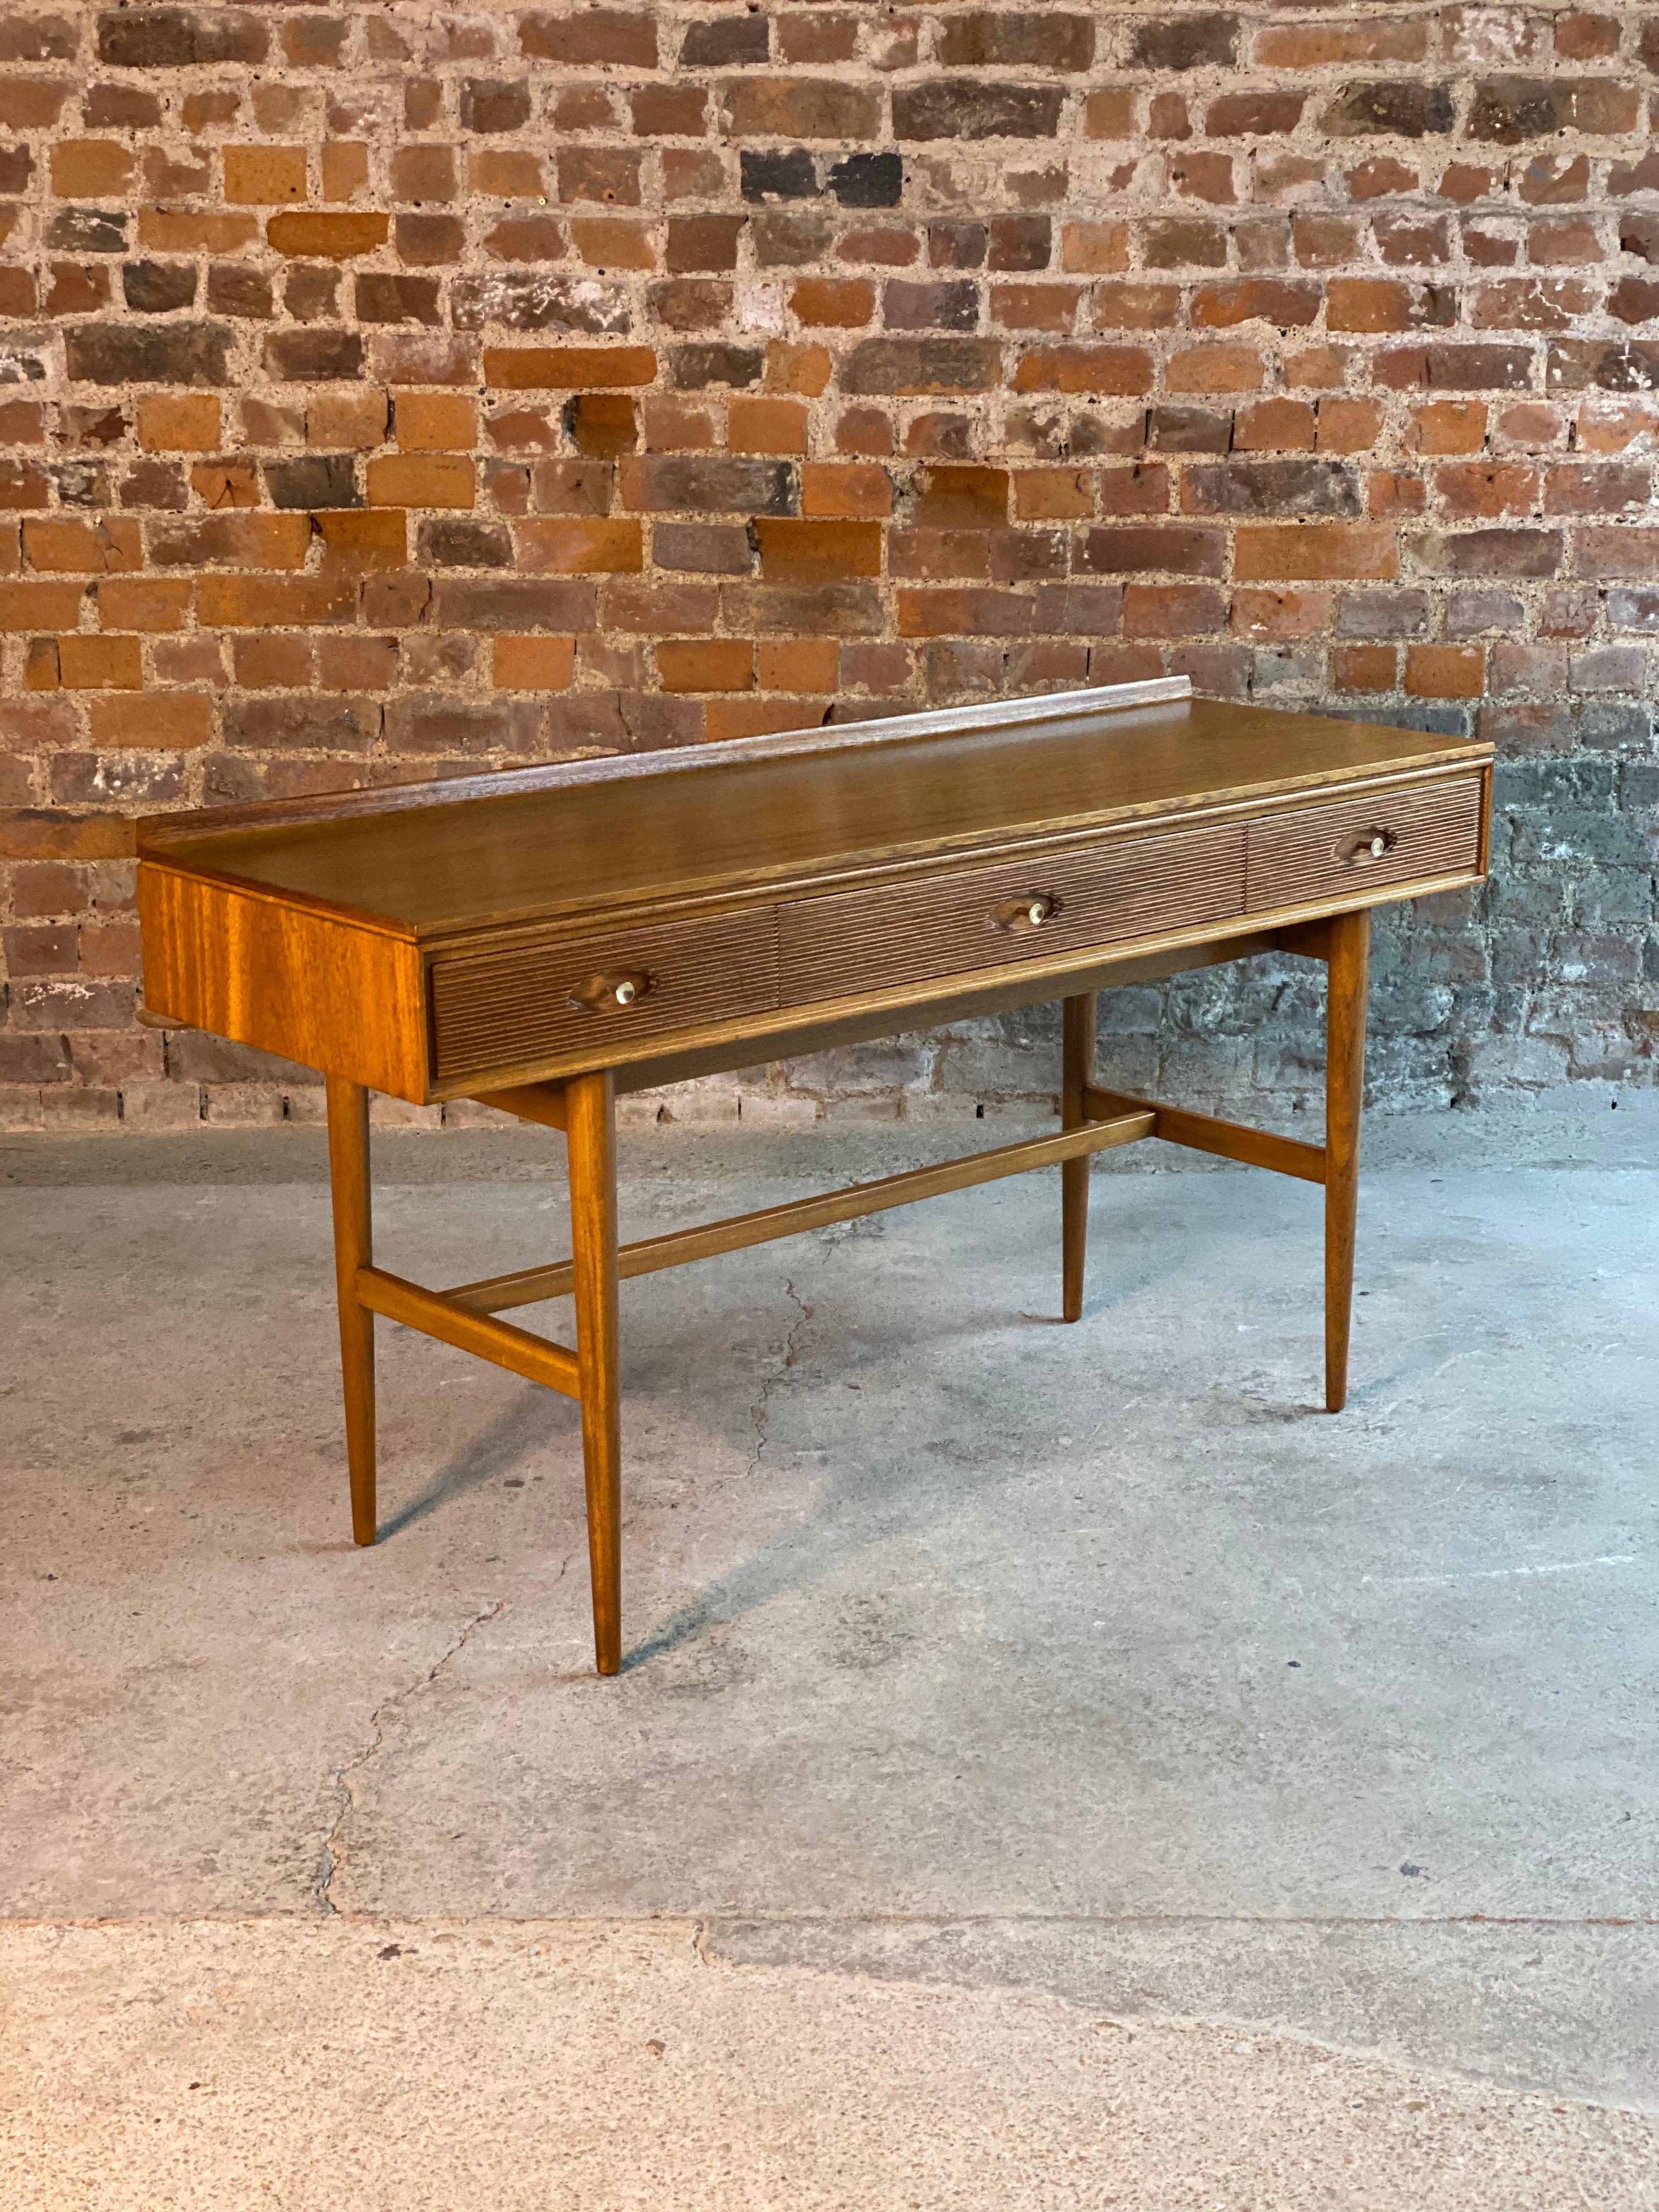 Robert heritage Hamilton teak console table by Archie Shine, circa 1960s

Midcentury deign Robert heritage teak Hamilton console table produced by Archie Shine and retailed through Harrod’s circa 1960s, the rectangular top over three fluted front